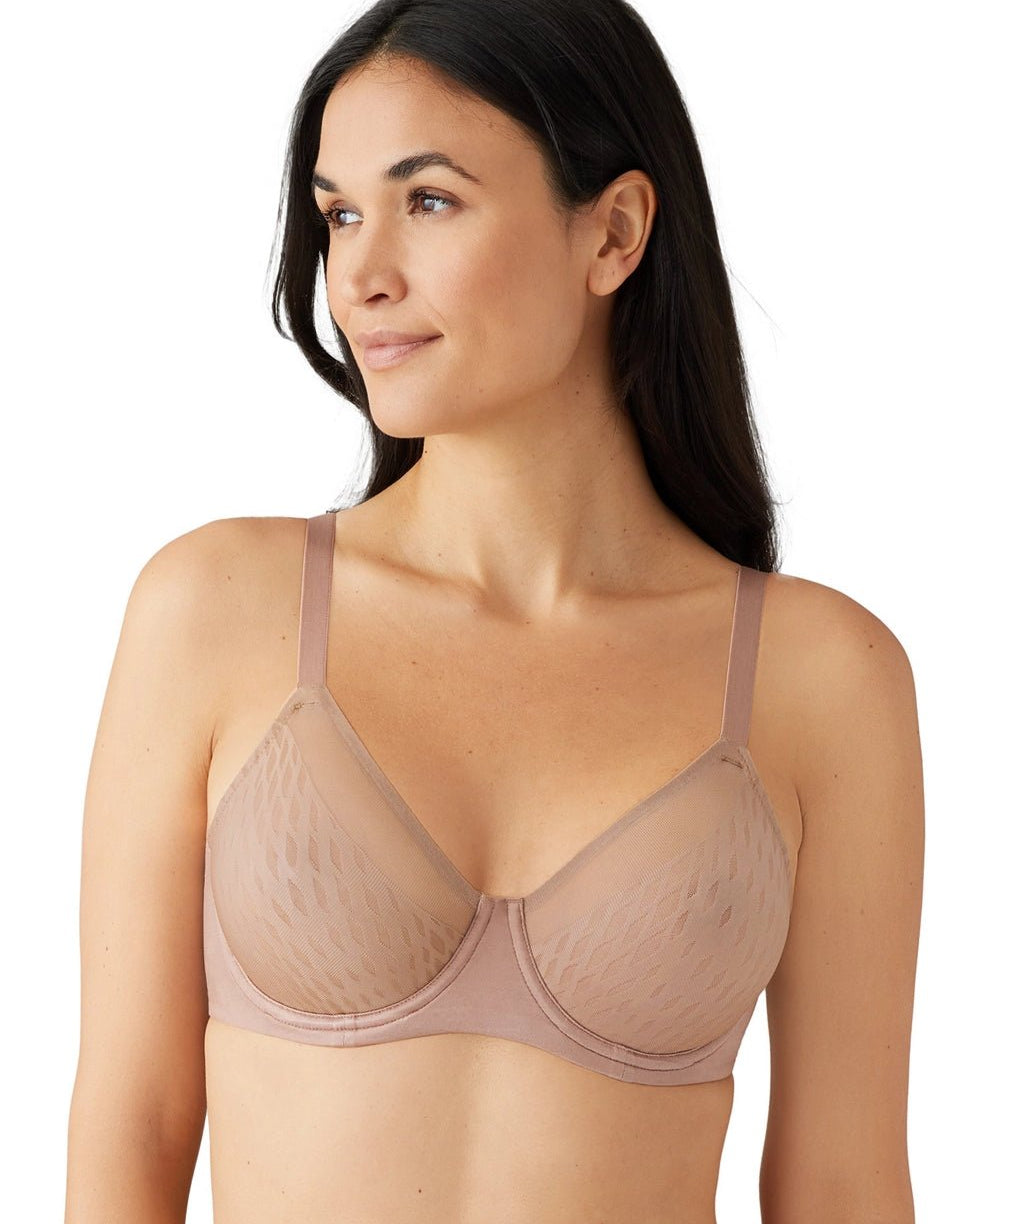 Elevated Allure 855336 wire free bra by Wacoal - Roebuck - Blue Sky Fashions & Lingerie